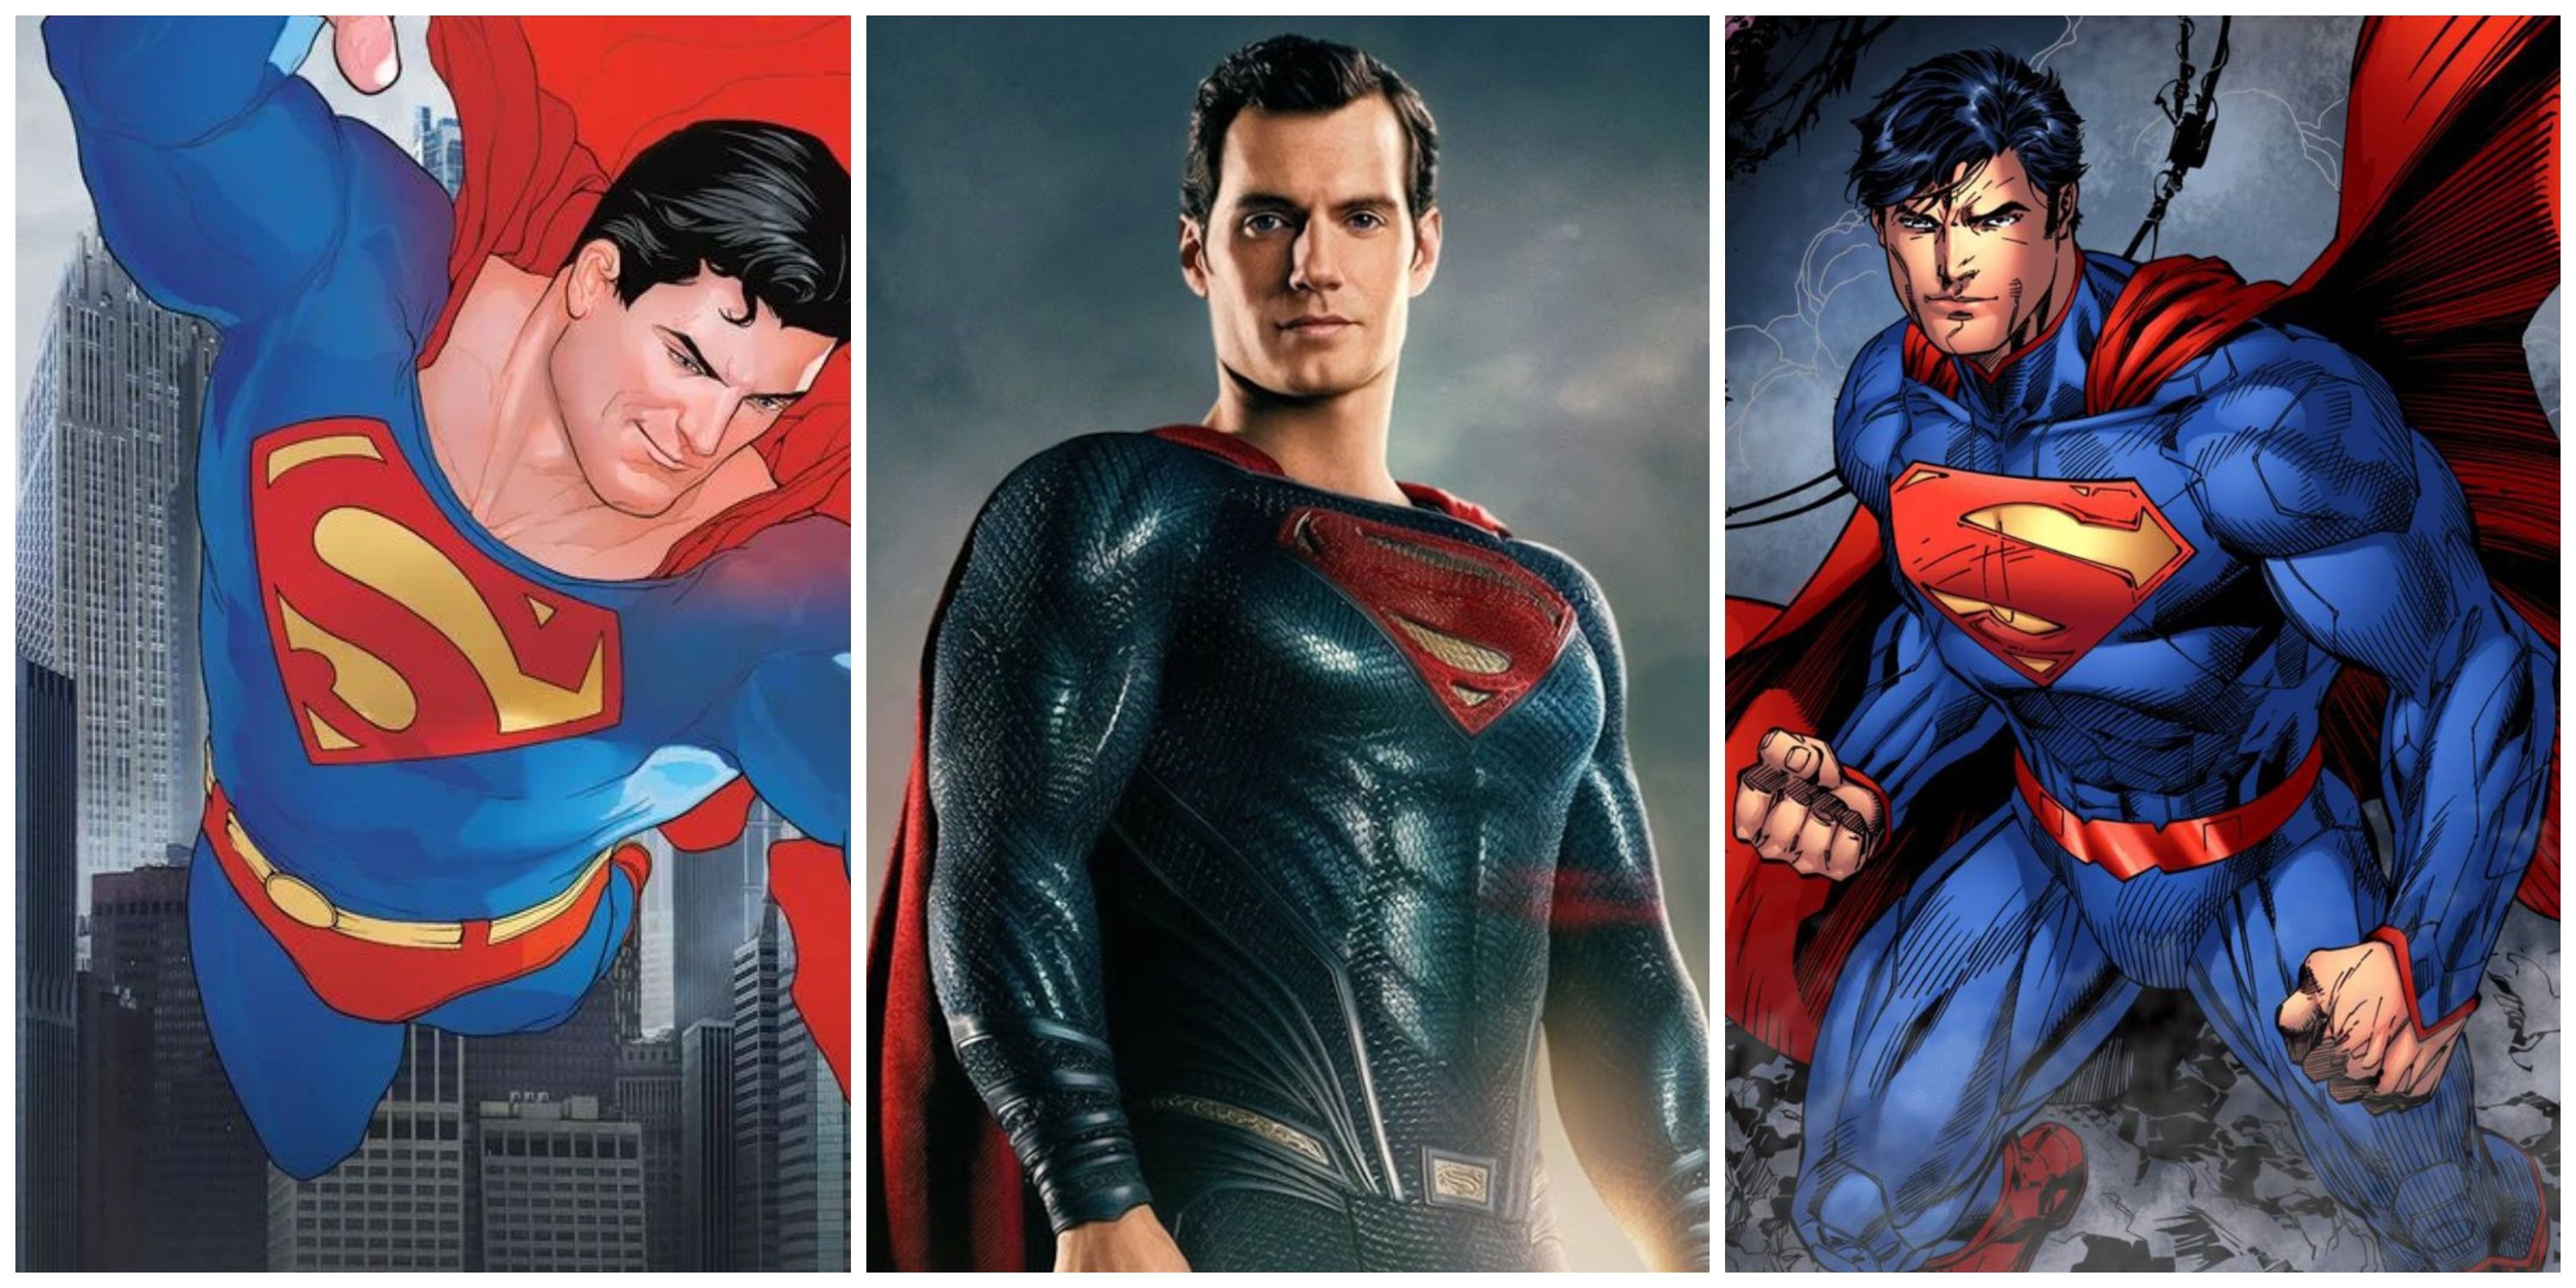 different superman costumes throughout comics and movies